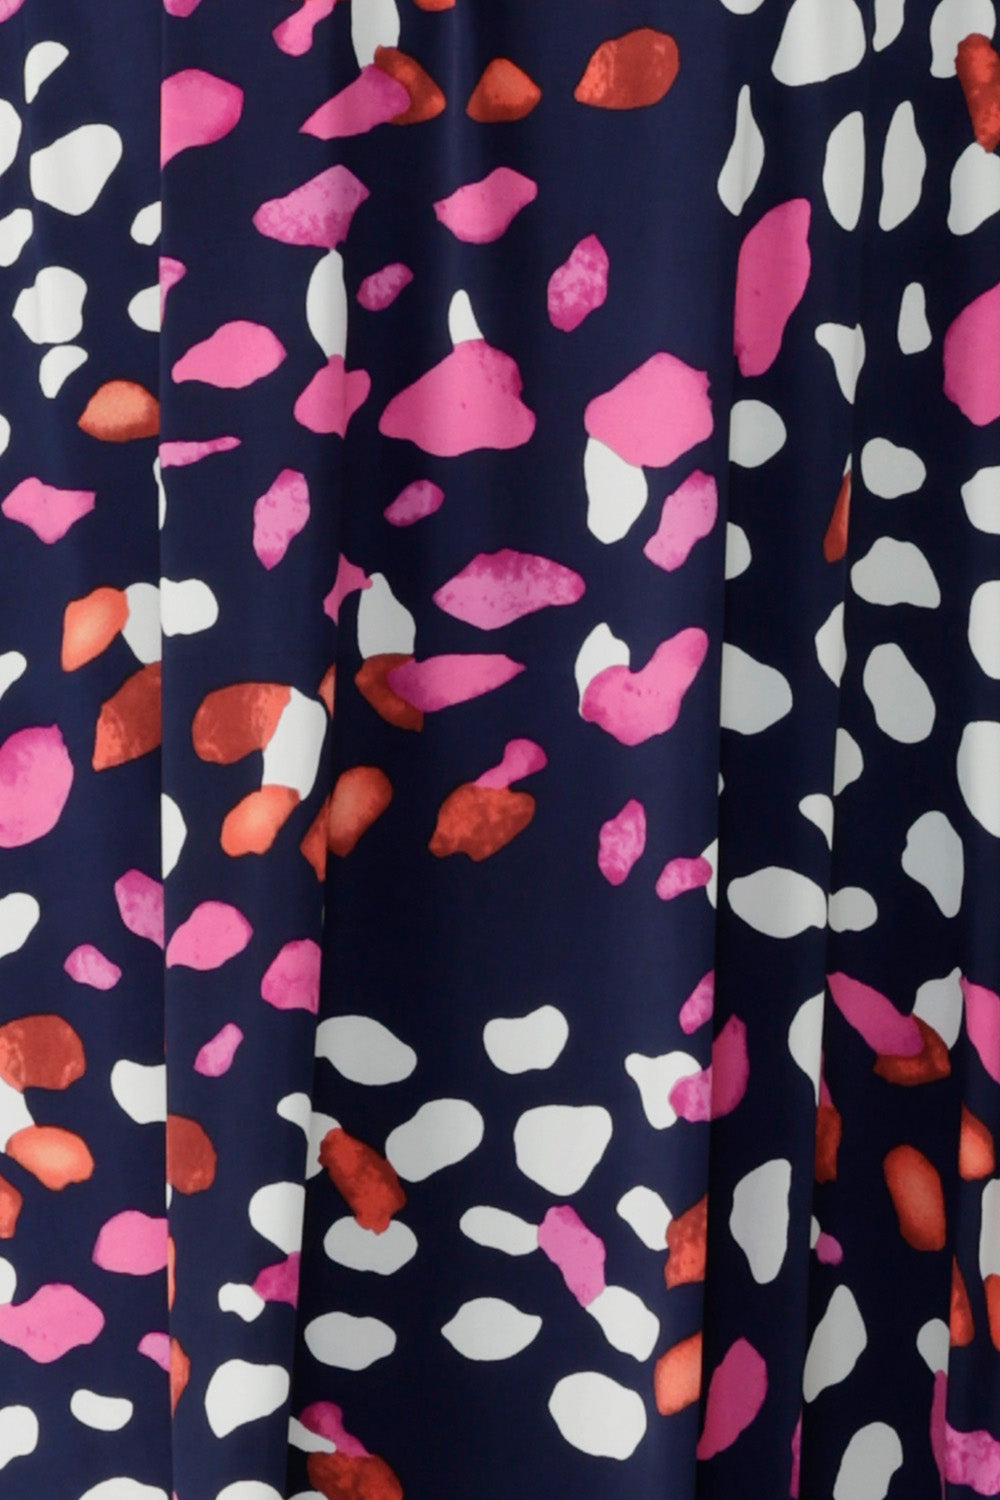 Fabric swatch of L&F Pink Mariposa print.  A fuchsia, red, and white abstract print on a navy, slinky jersey base. This fabric has soft stretch. Used by Australian clothing label Leina & Fleur to make women’s dresses and tops.